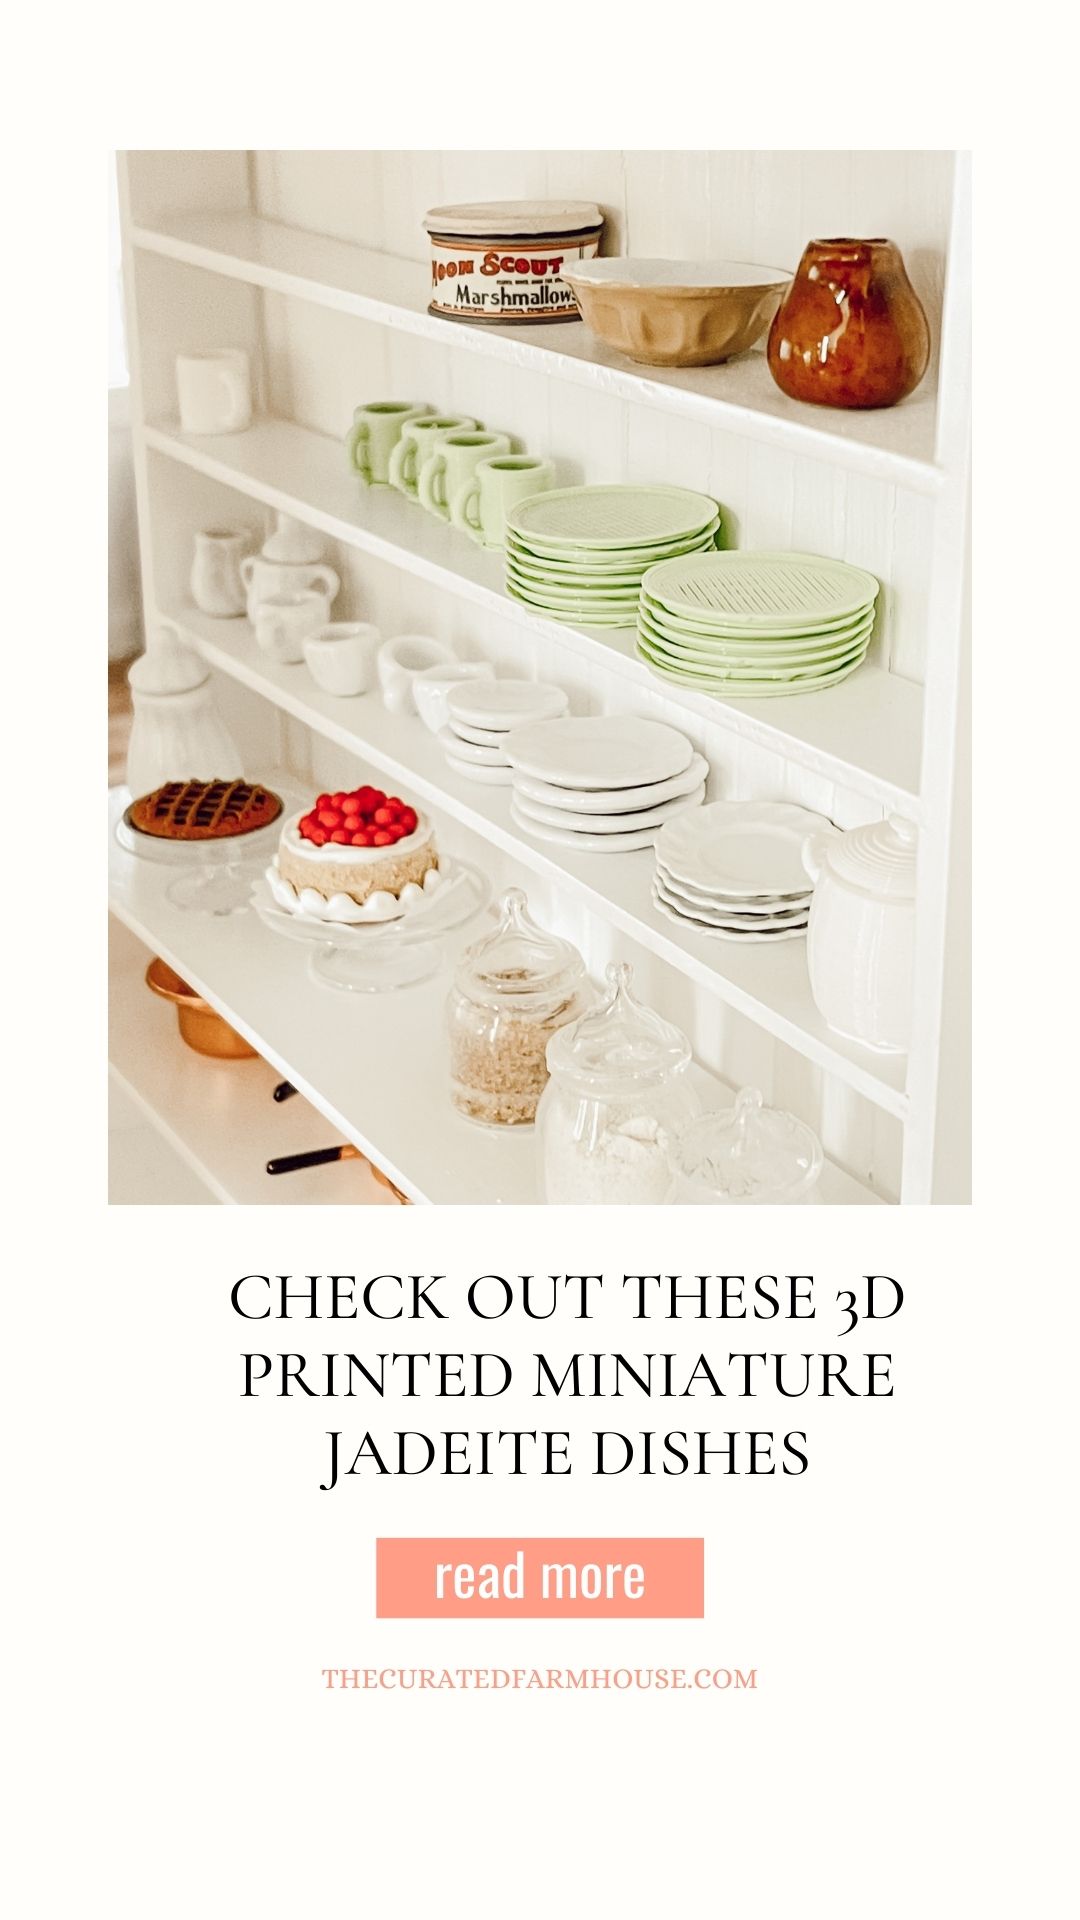 Check Out These 3D Printed Miniature Jadeite Dishes